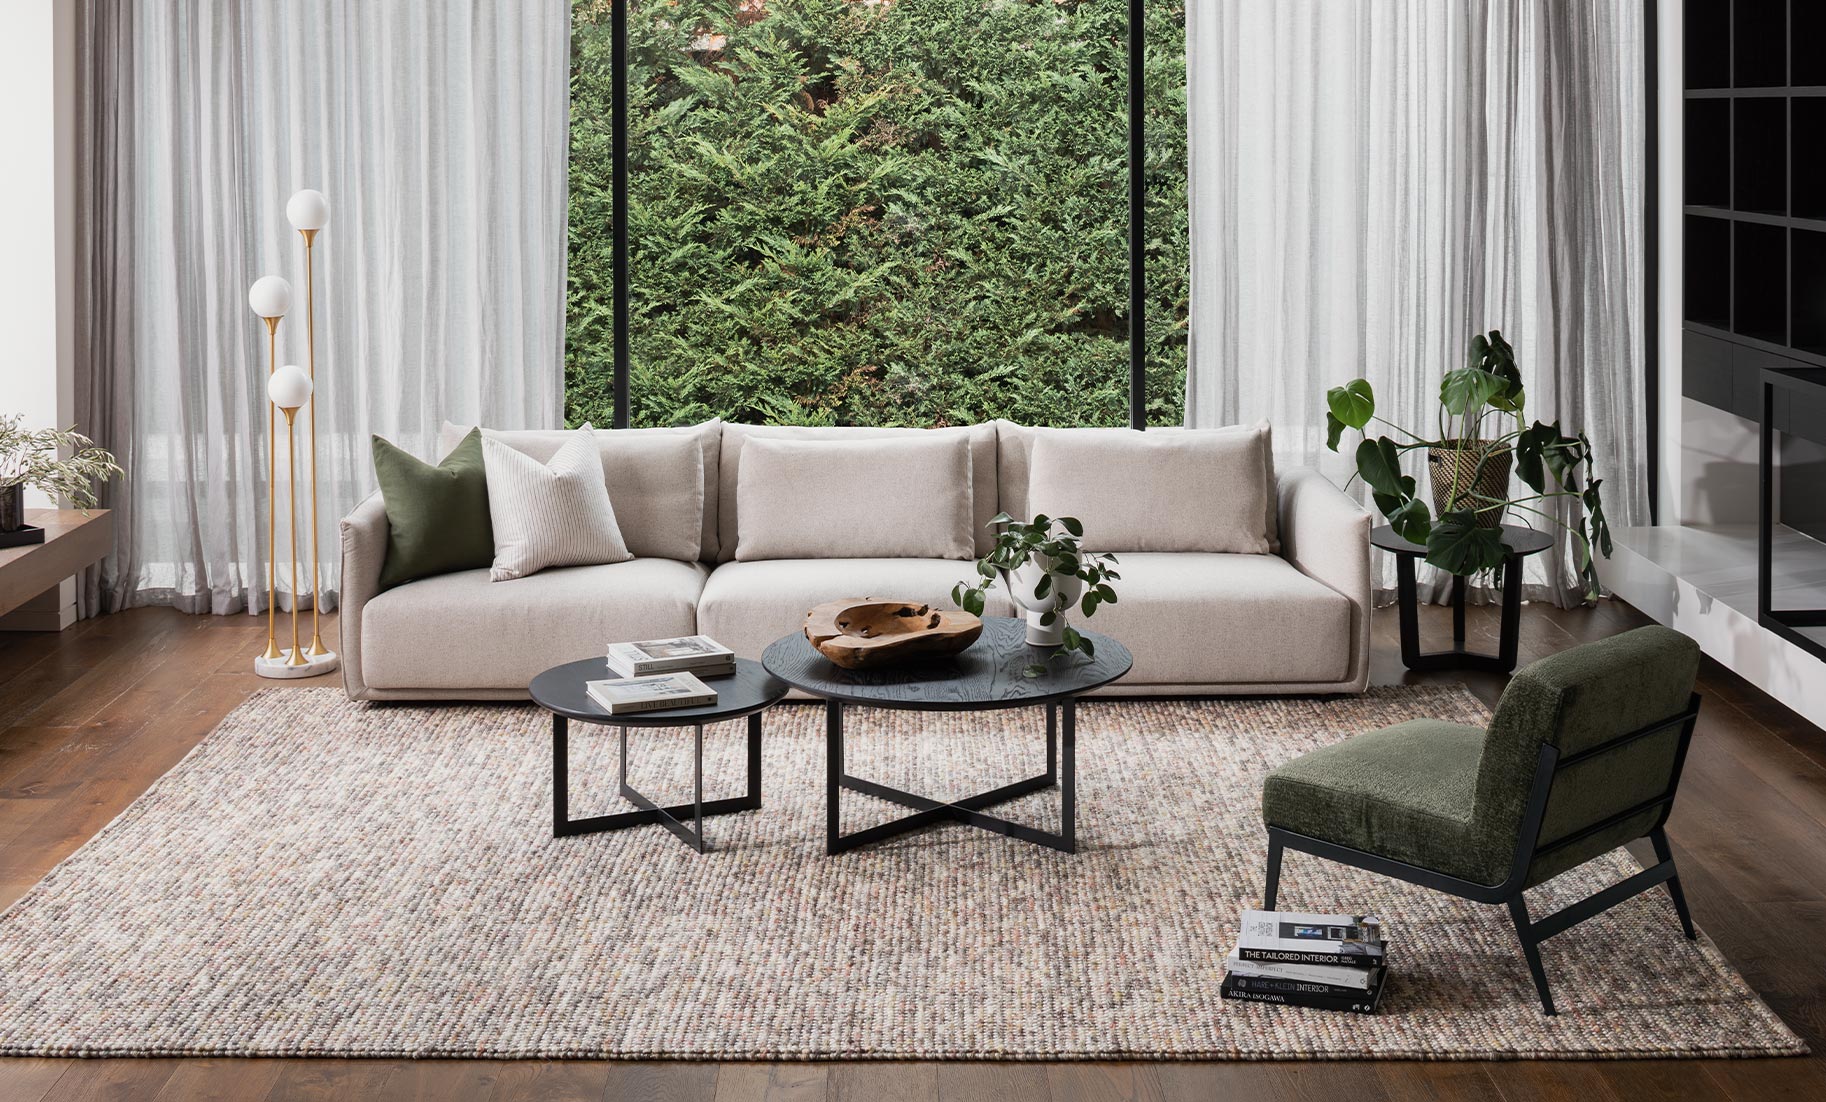 Insitu featuring magic spice, stella lounge, milton chair by The Rug Collection